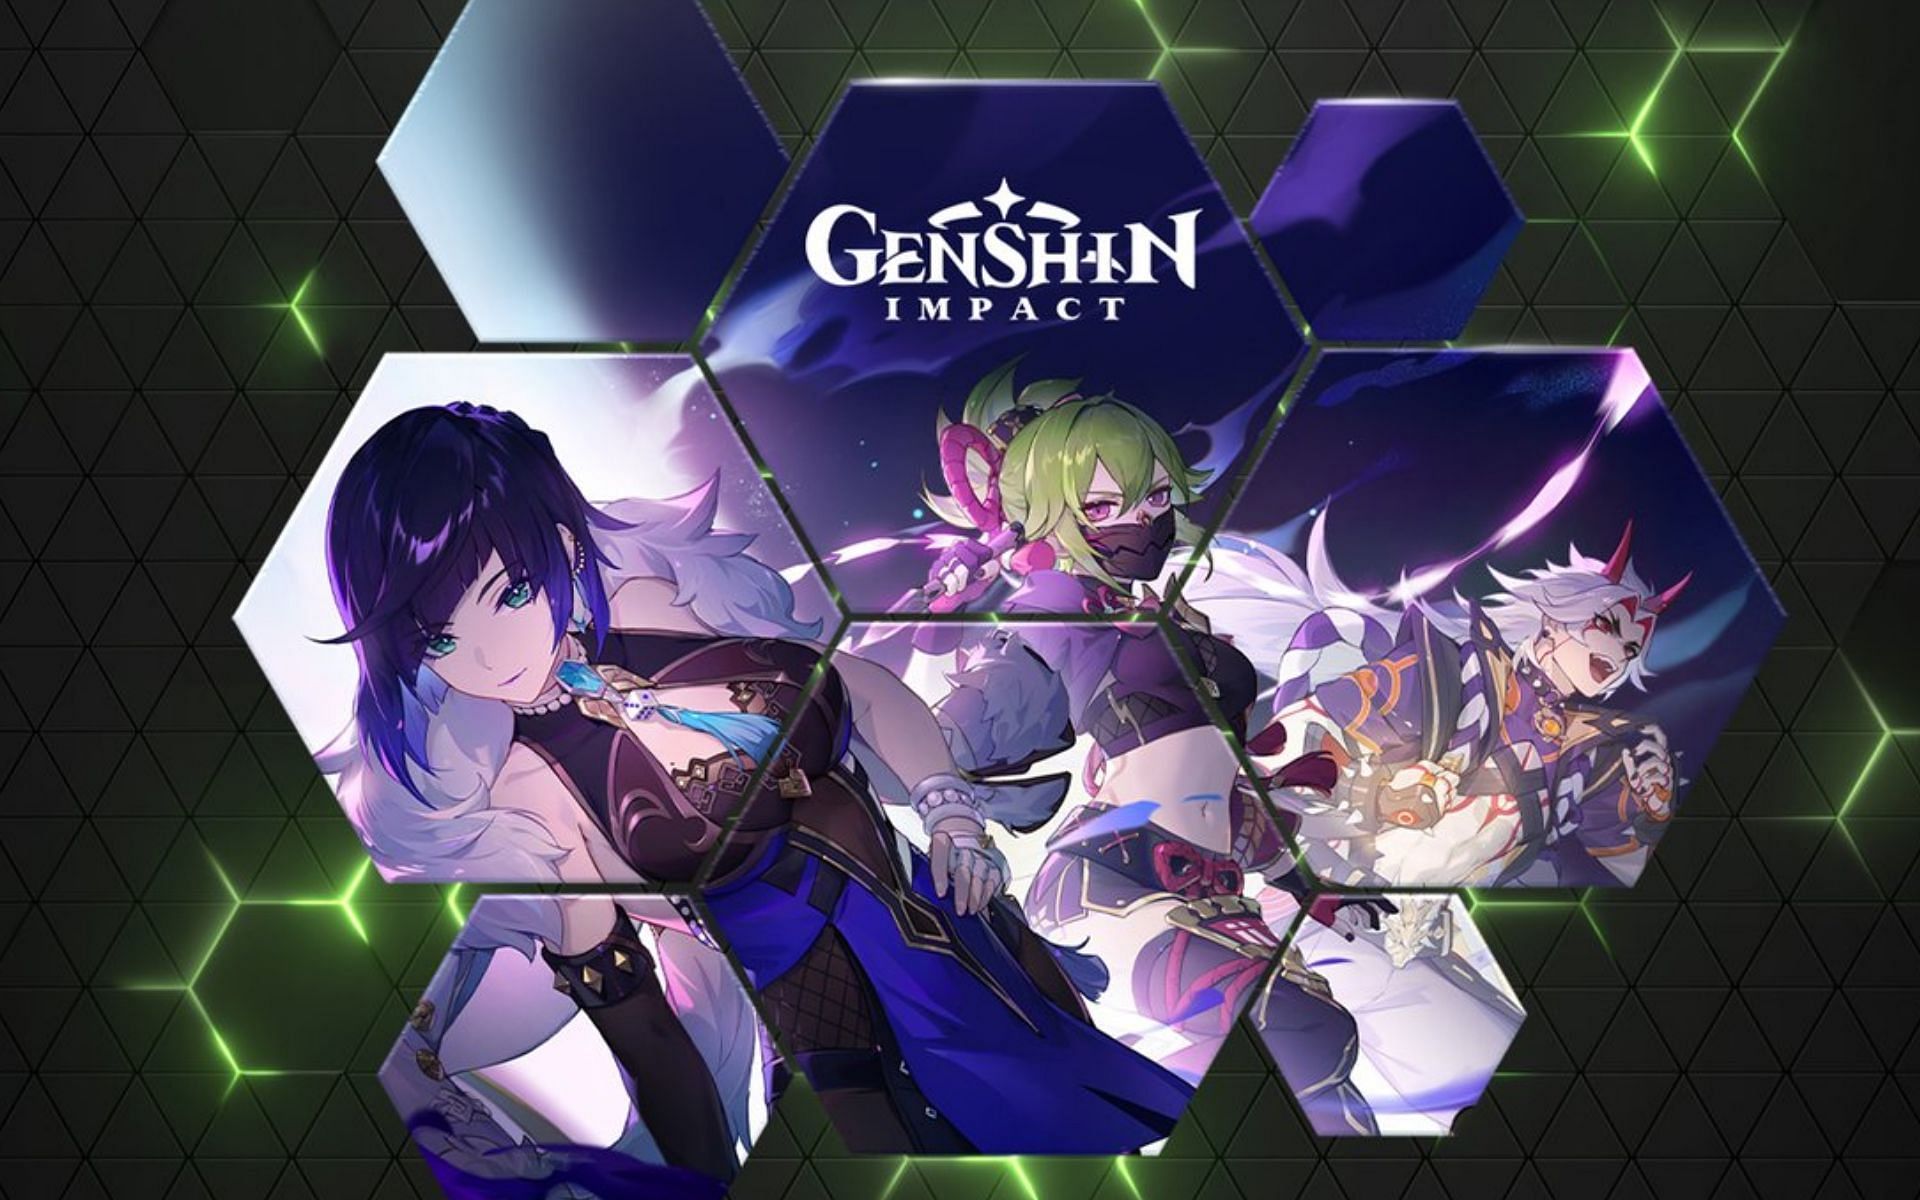 The official advertisement used in this Genshin Impact promotion (Image via NVIDIA, HoYoverse)